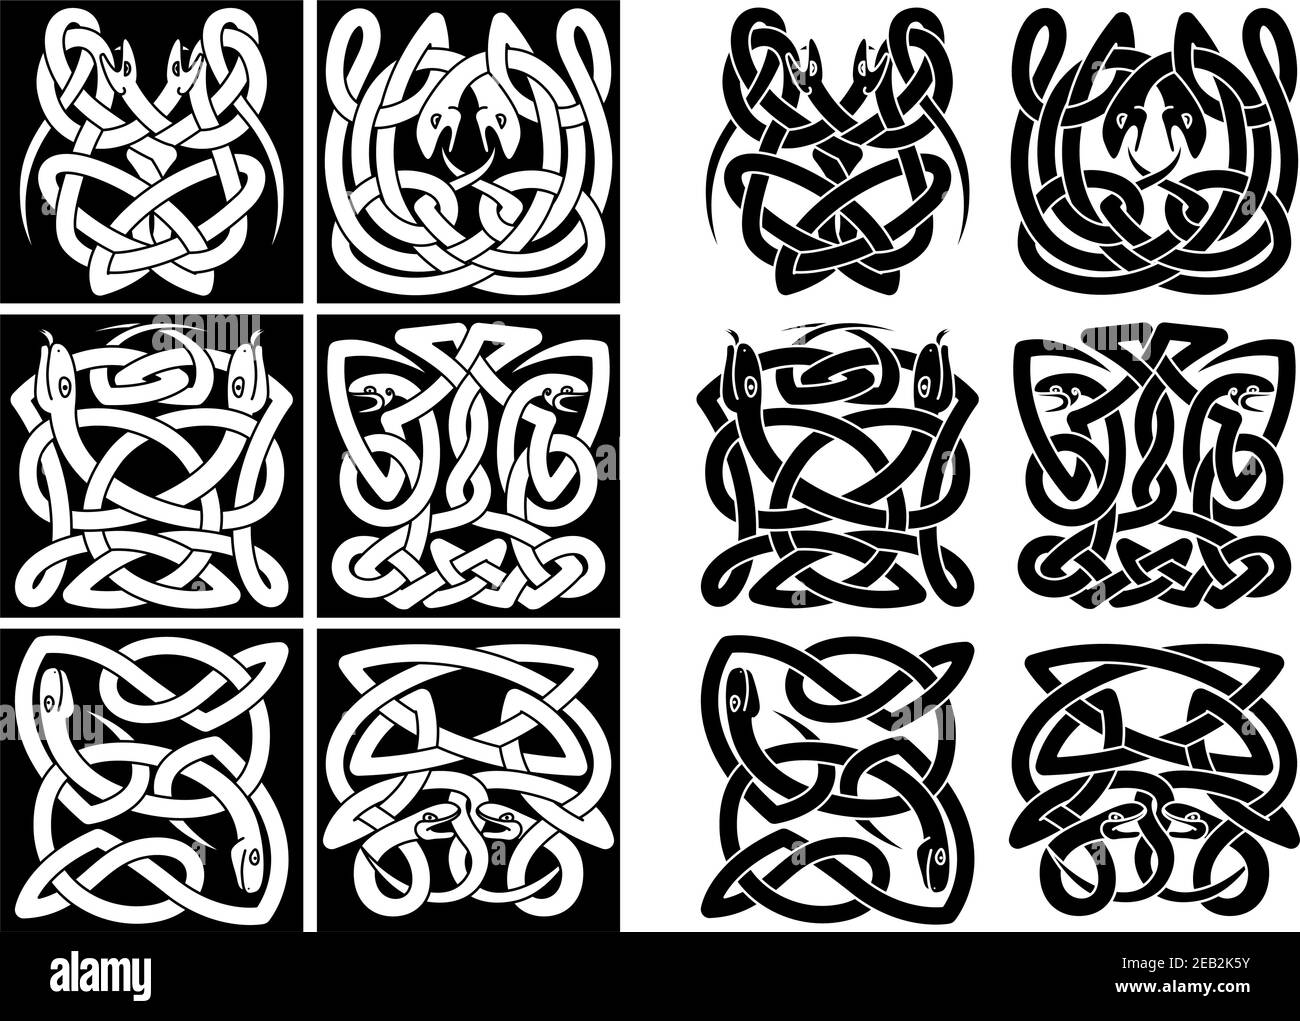 Snakes and reptiles celtic patterns in black or white colors. For art or tattoo design Stock Vector